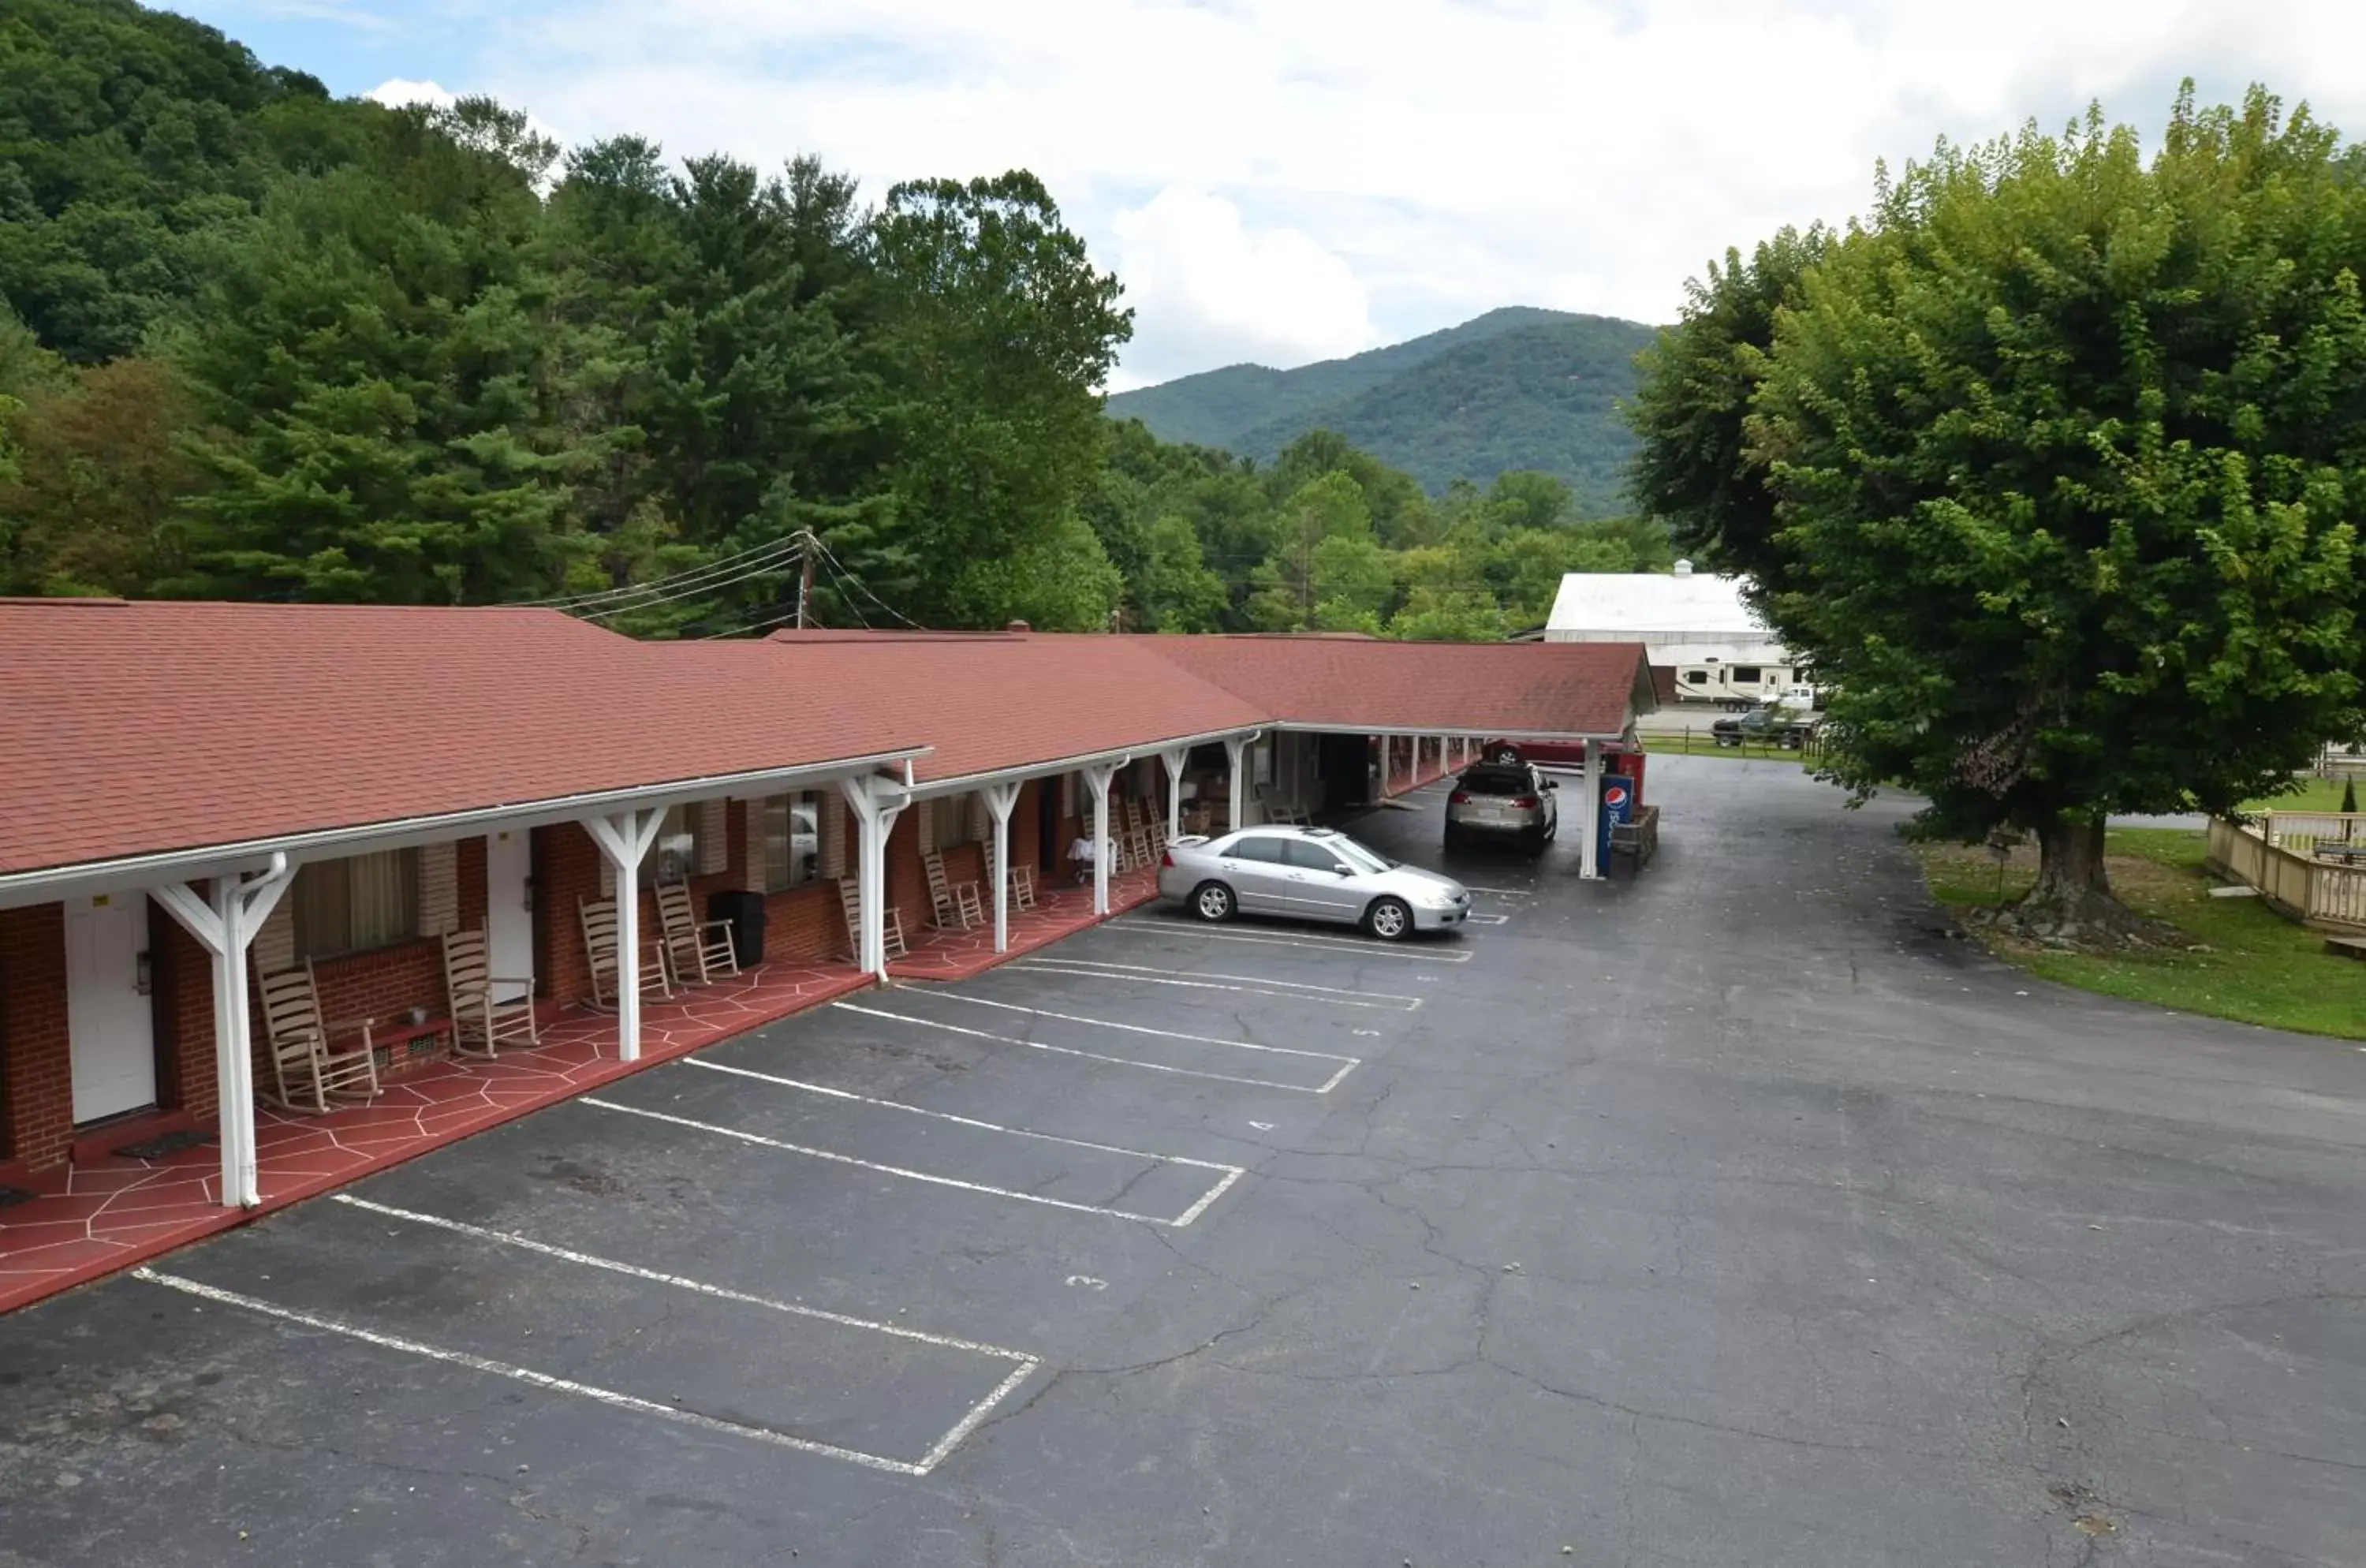 Parking in Travelowes Motel - Maggie Valley